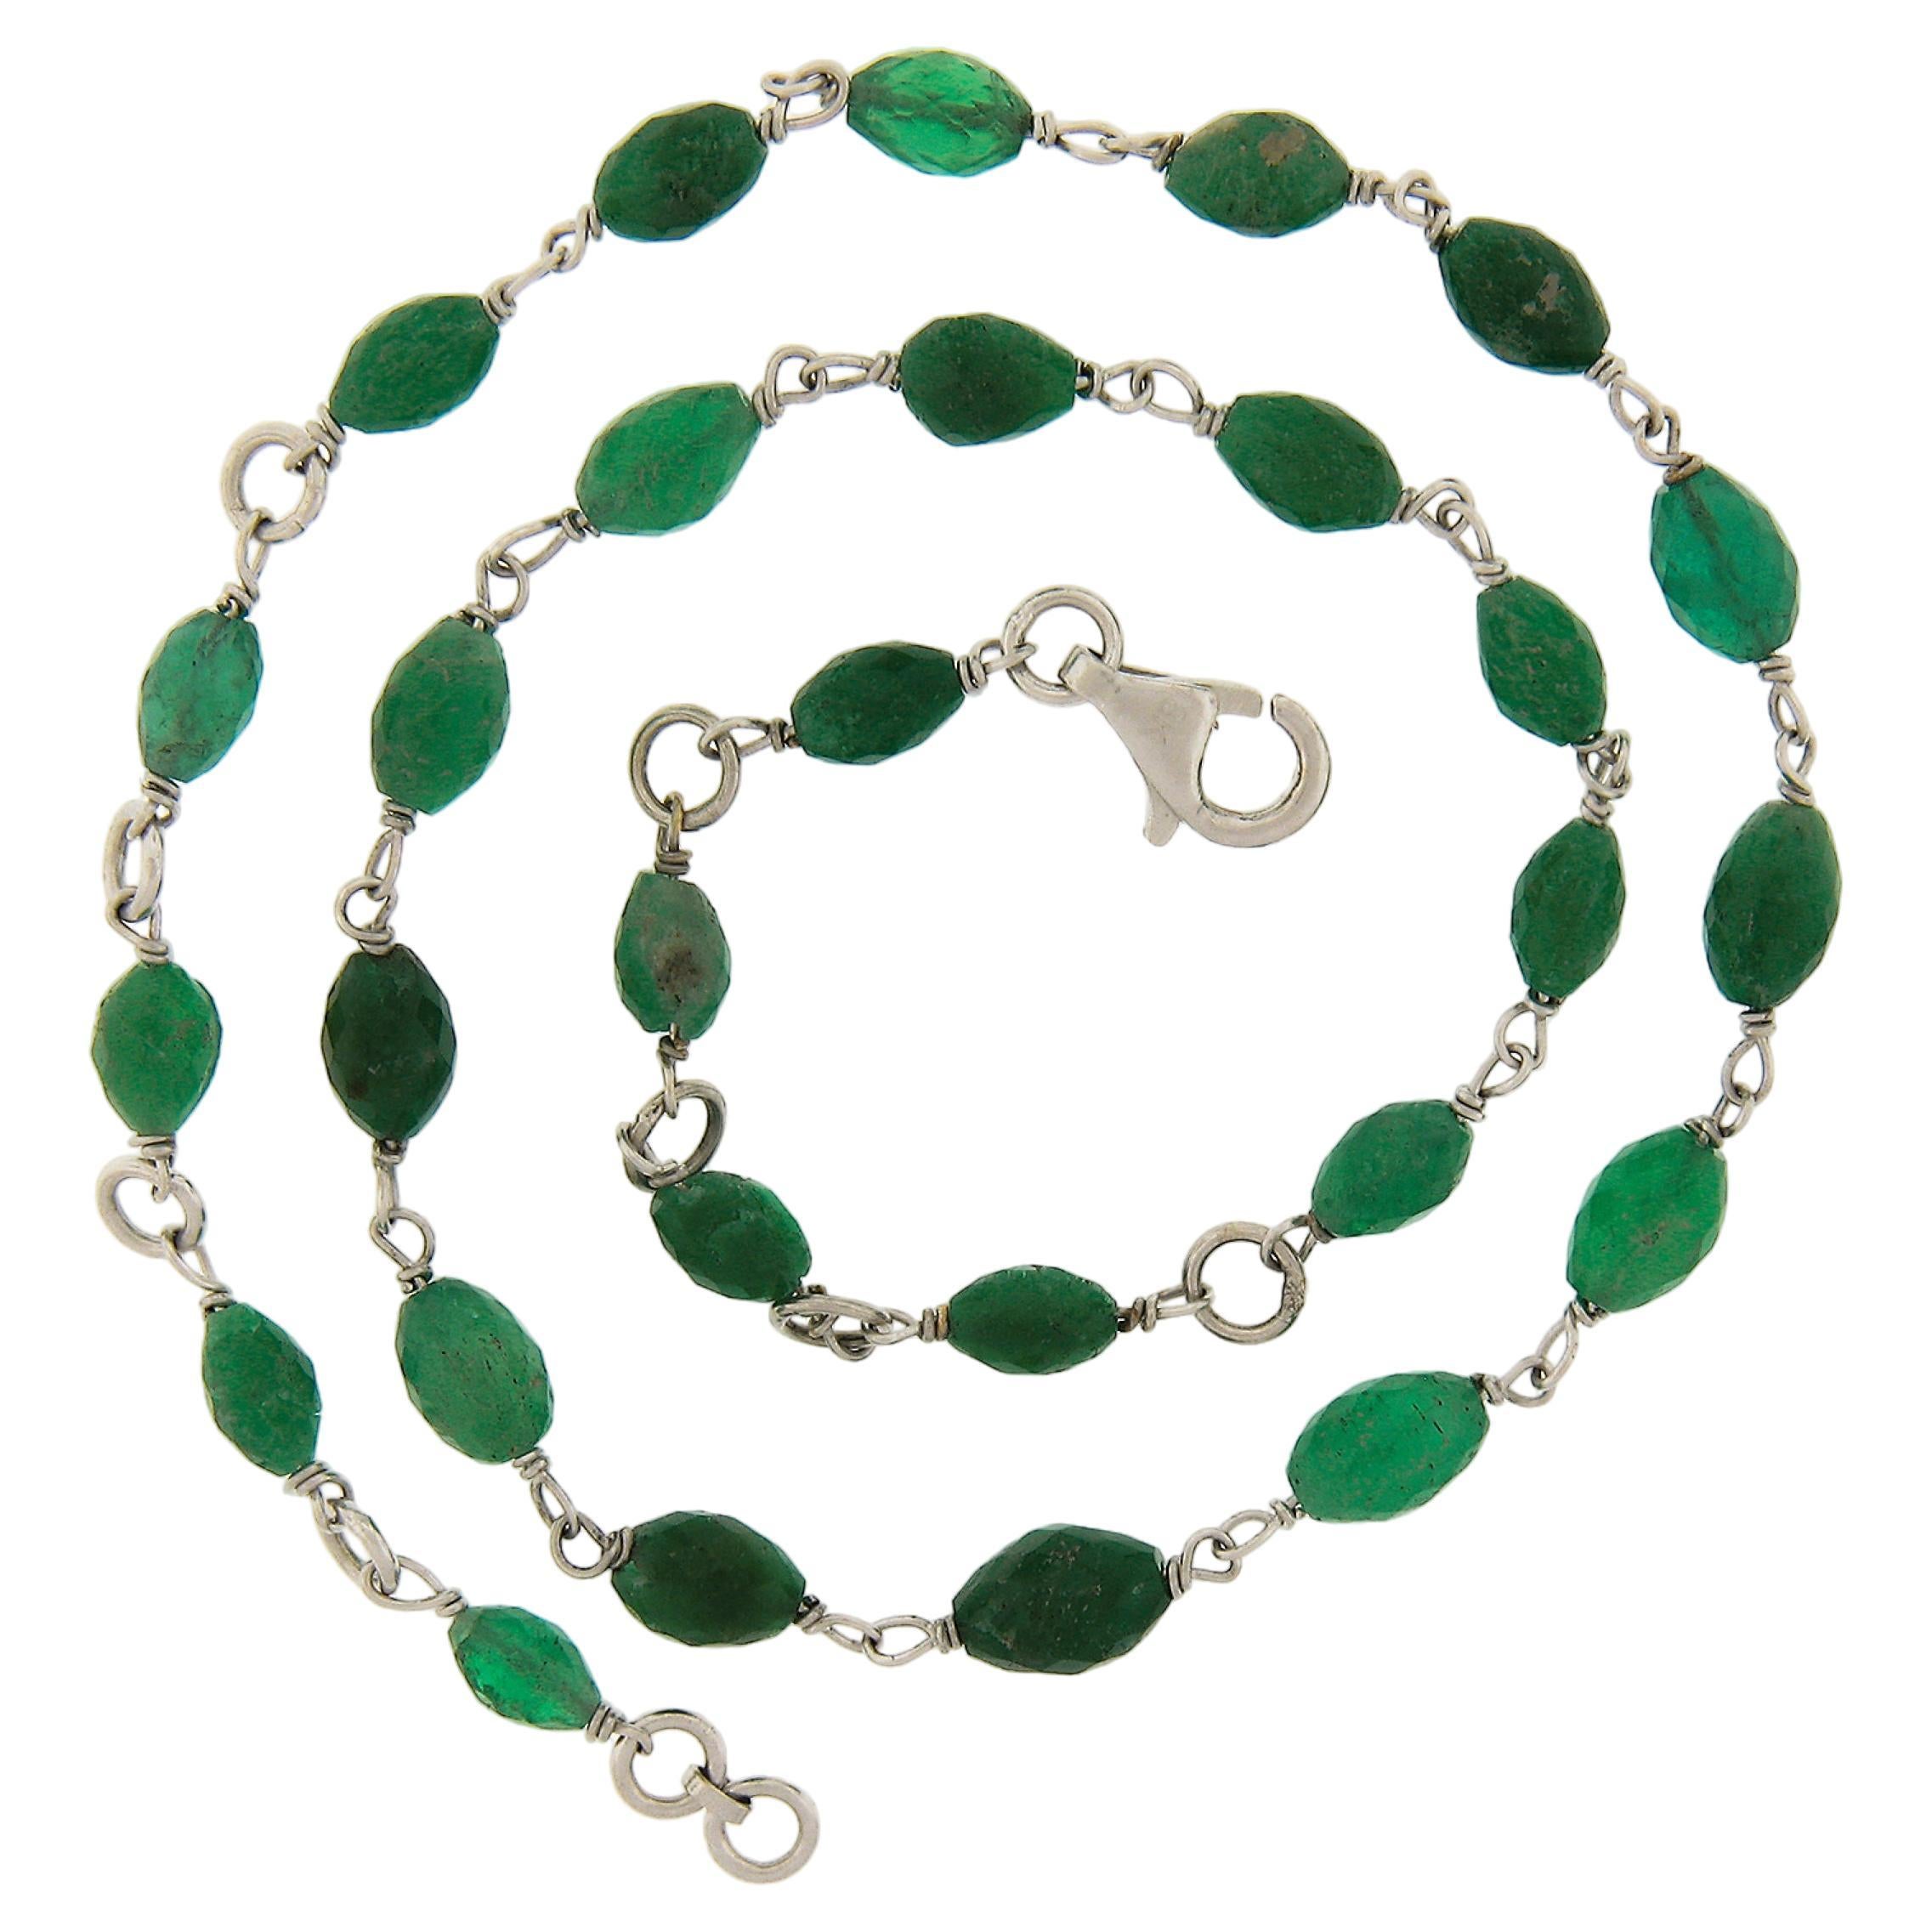 18k White Gold 15.5" Faceted Barrel Bead GIA Green Emerald Choker Necklace For Sale